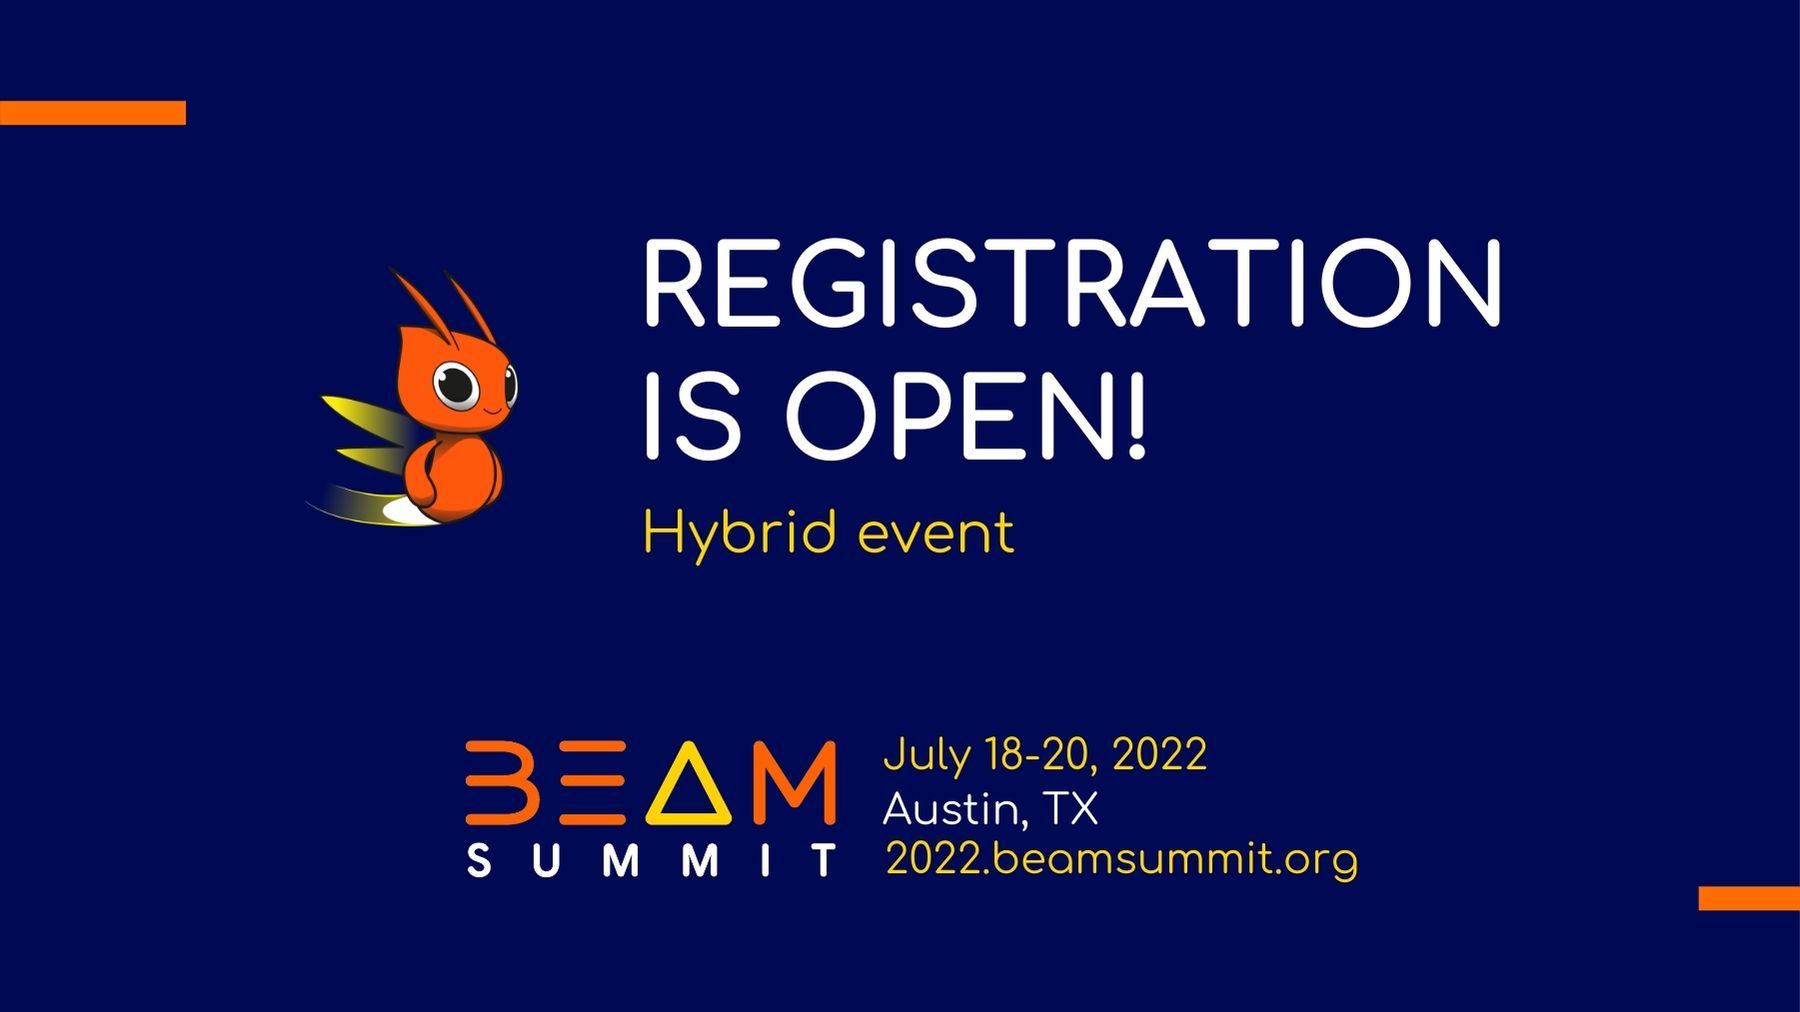 Get your early bird tickets for Beam Summit 2022